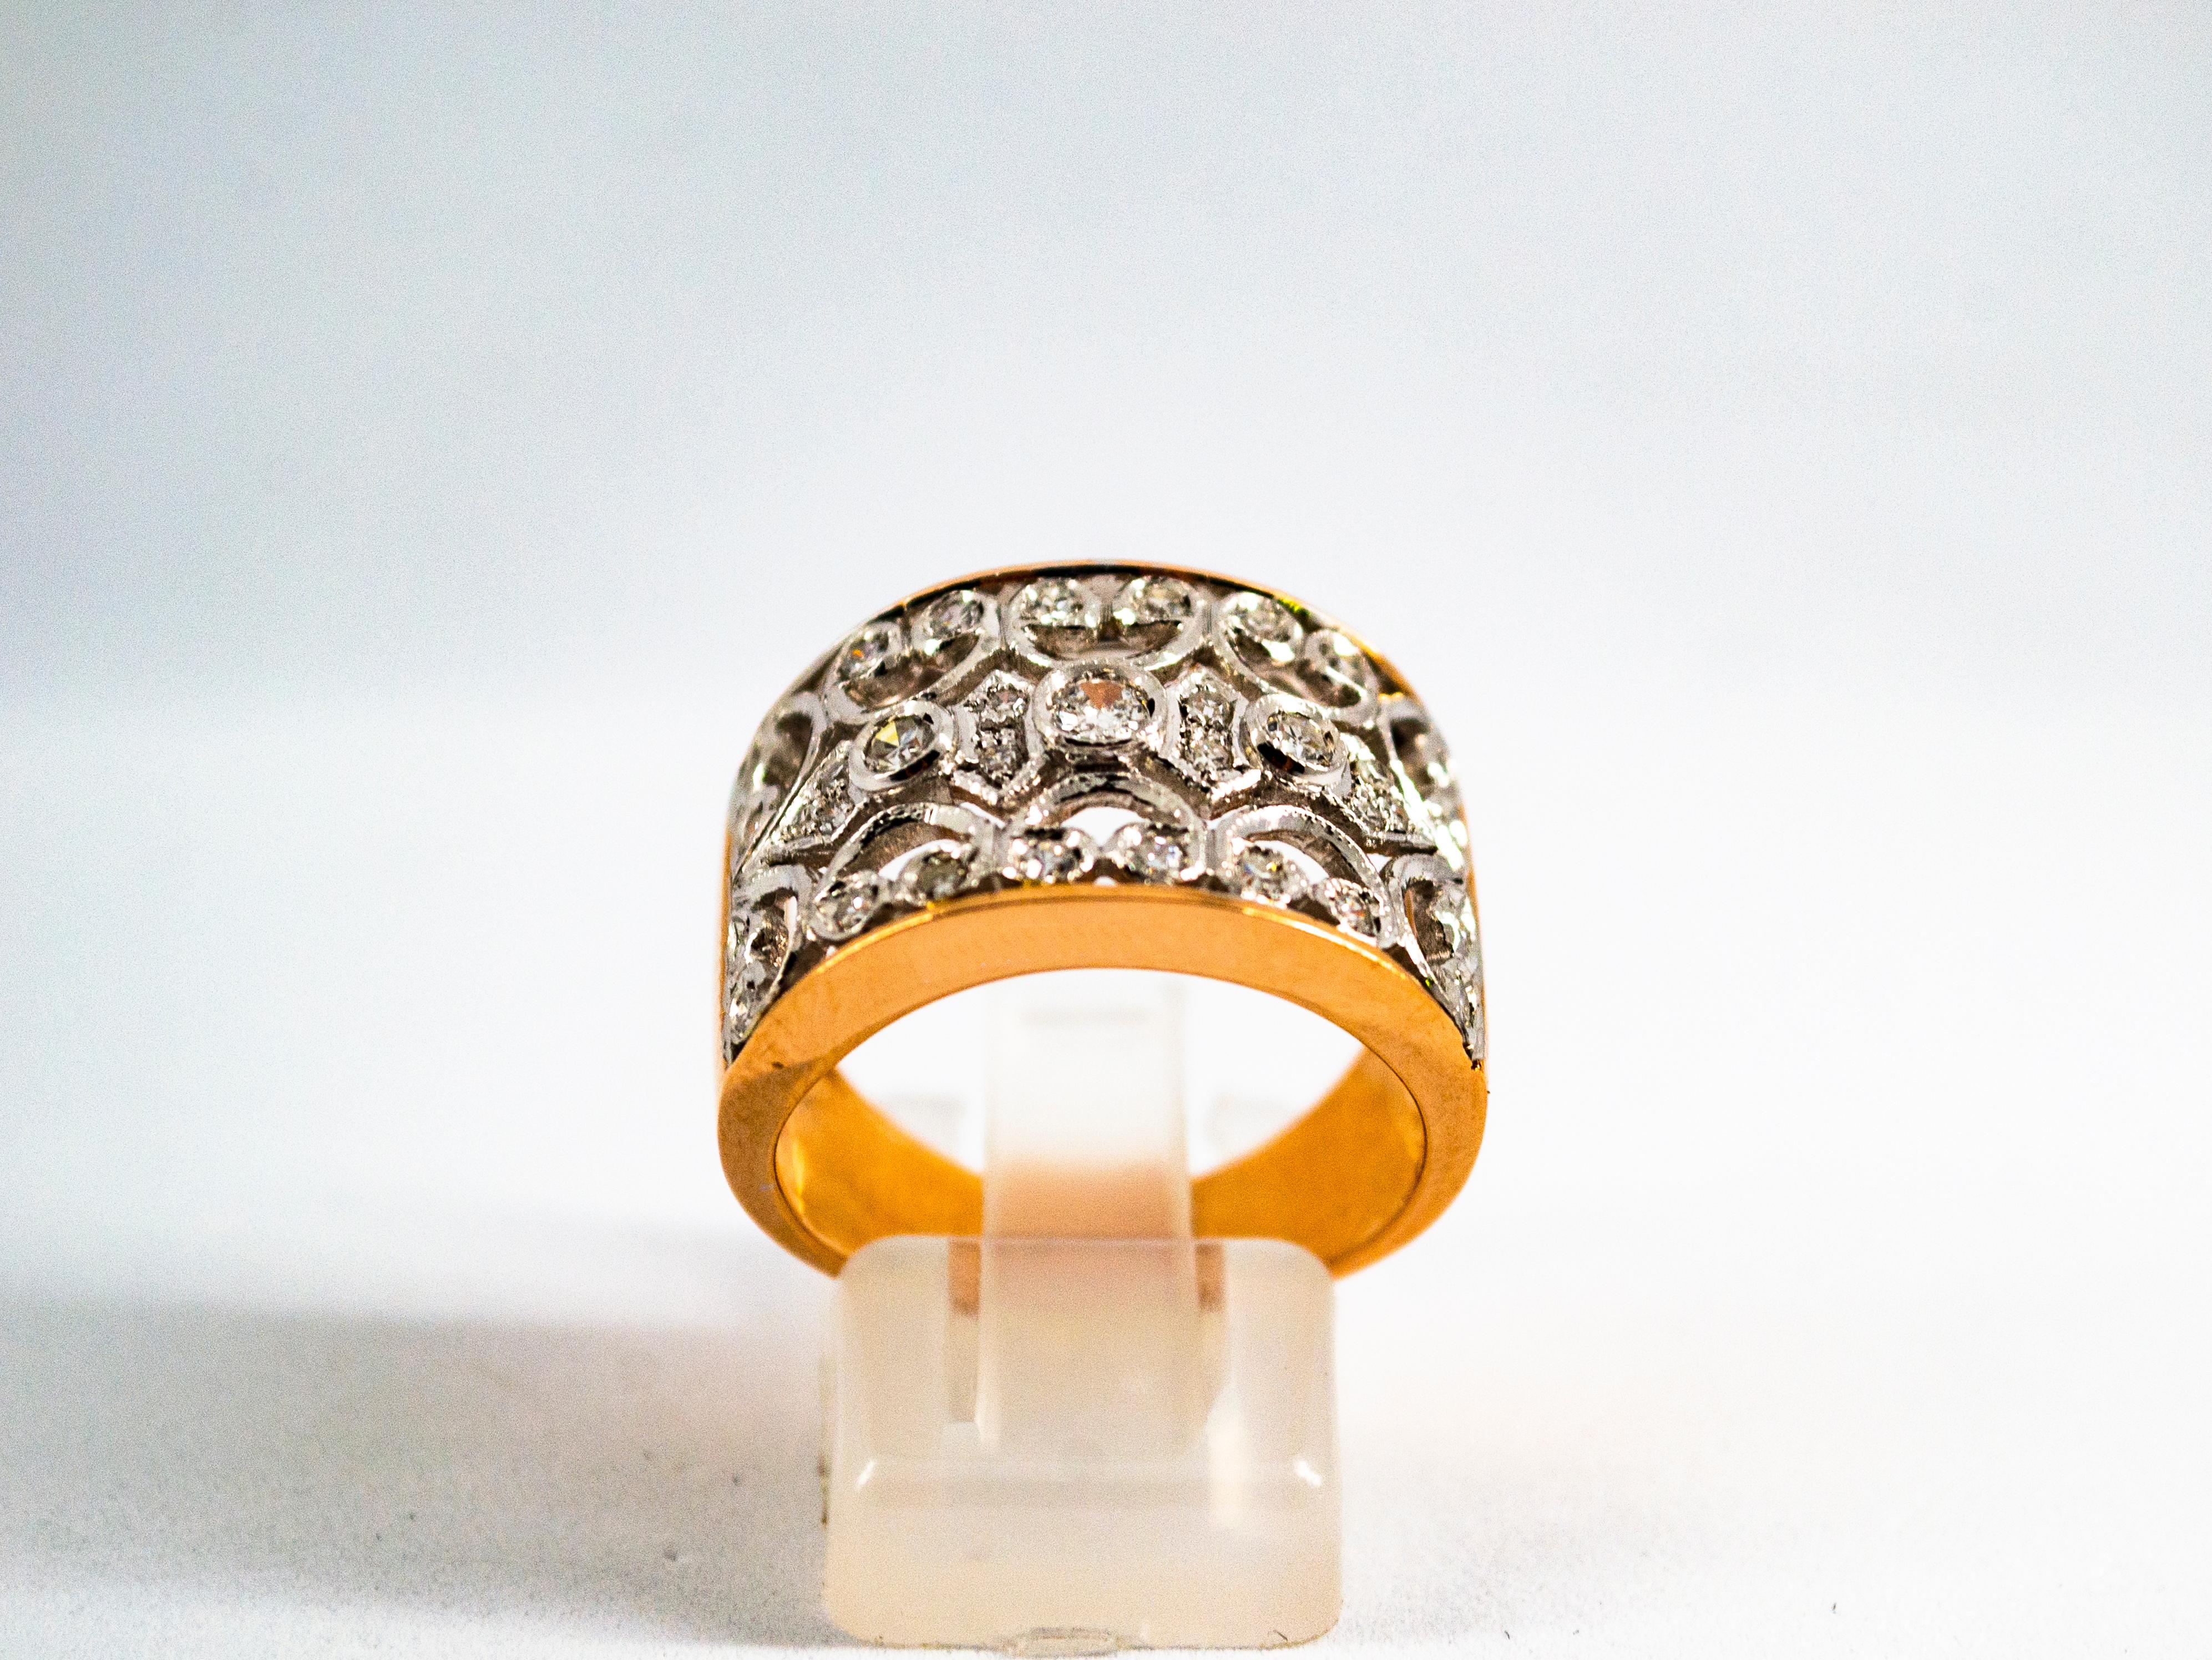 This Ring is made of 14K Rose Gold and White Gold.
This Ring has 0.50 Carat of White Brilliant Cut Diamonds.
Size ITA: 16 USA: 7.5

We're a workshop so every piece is handmade, customizable and resizable.